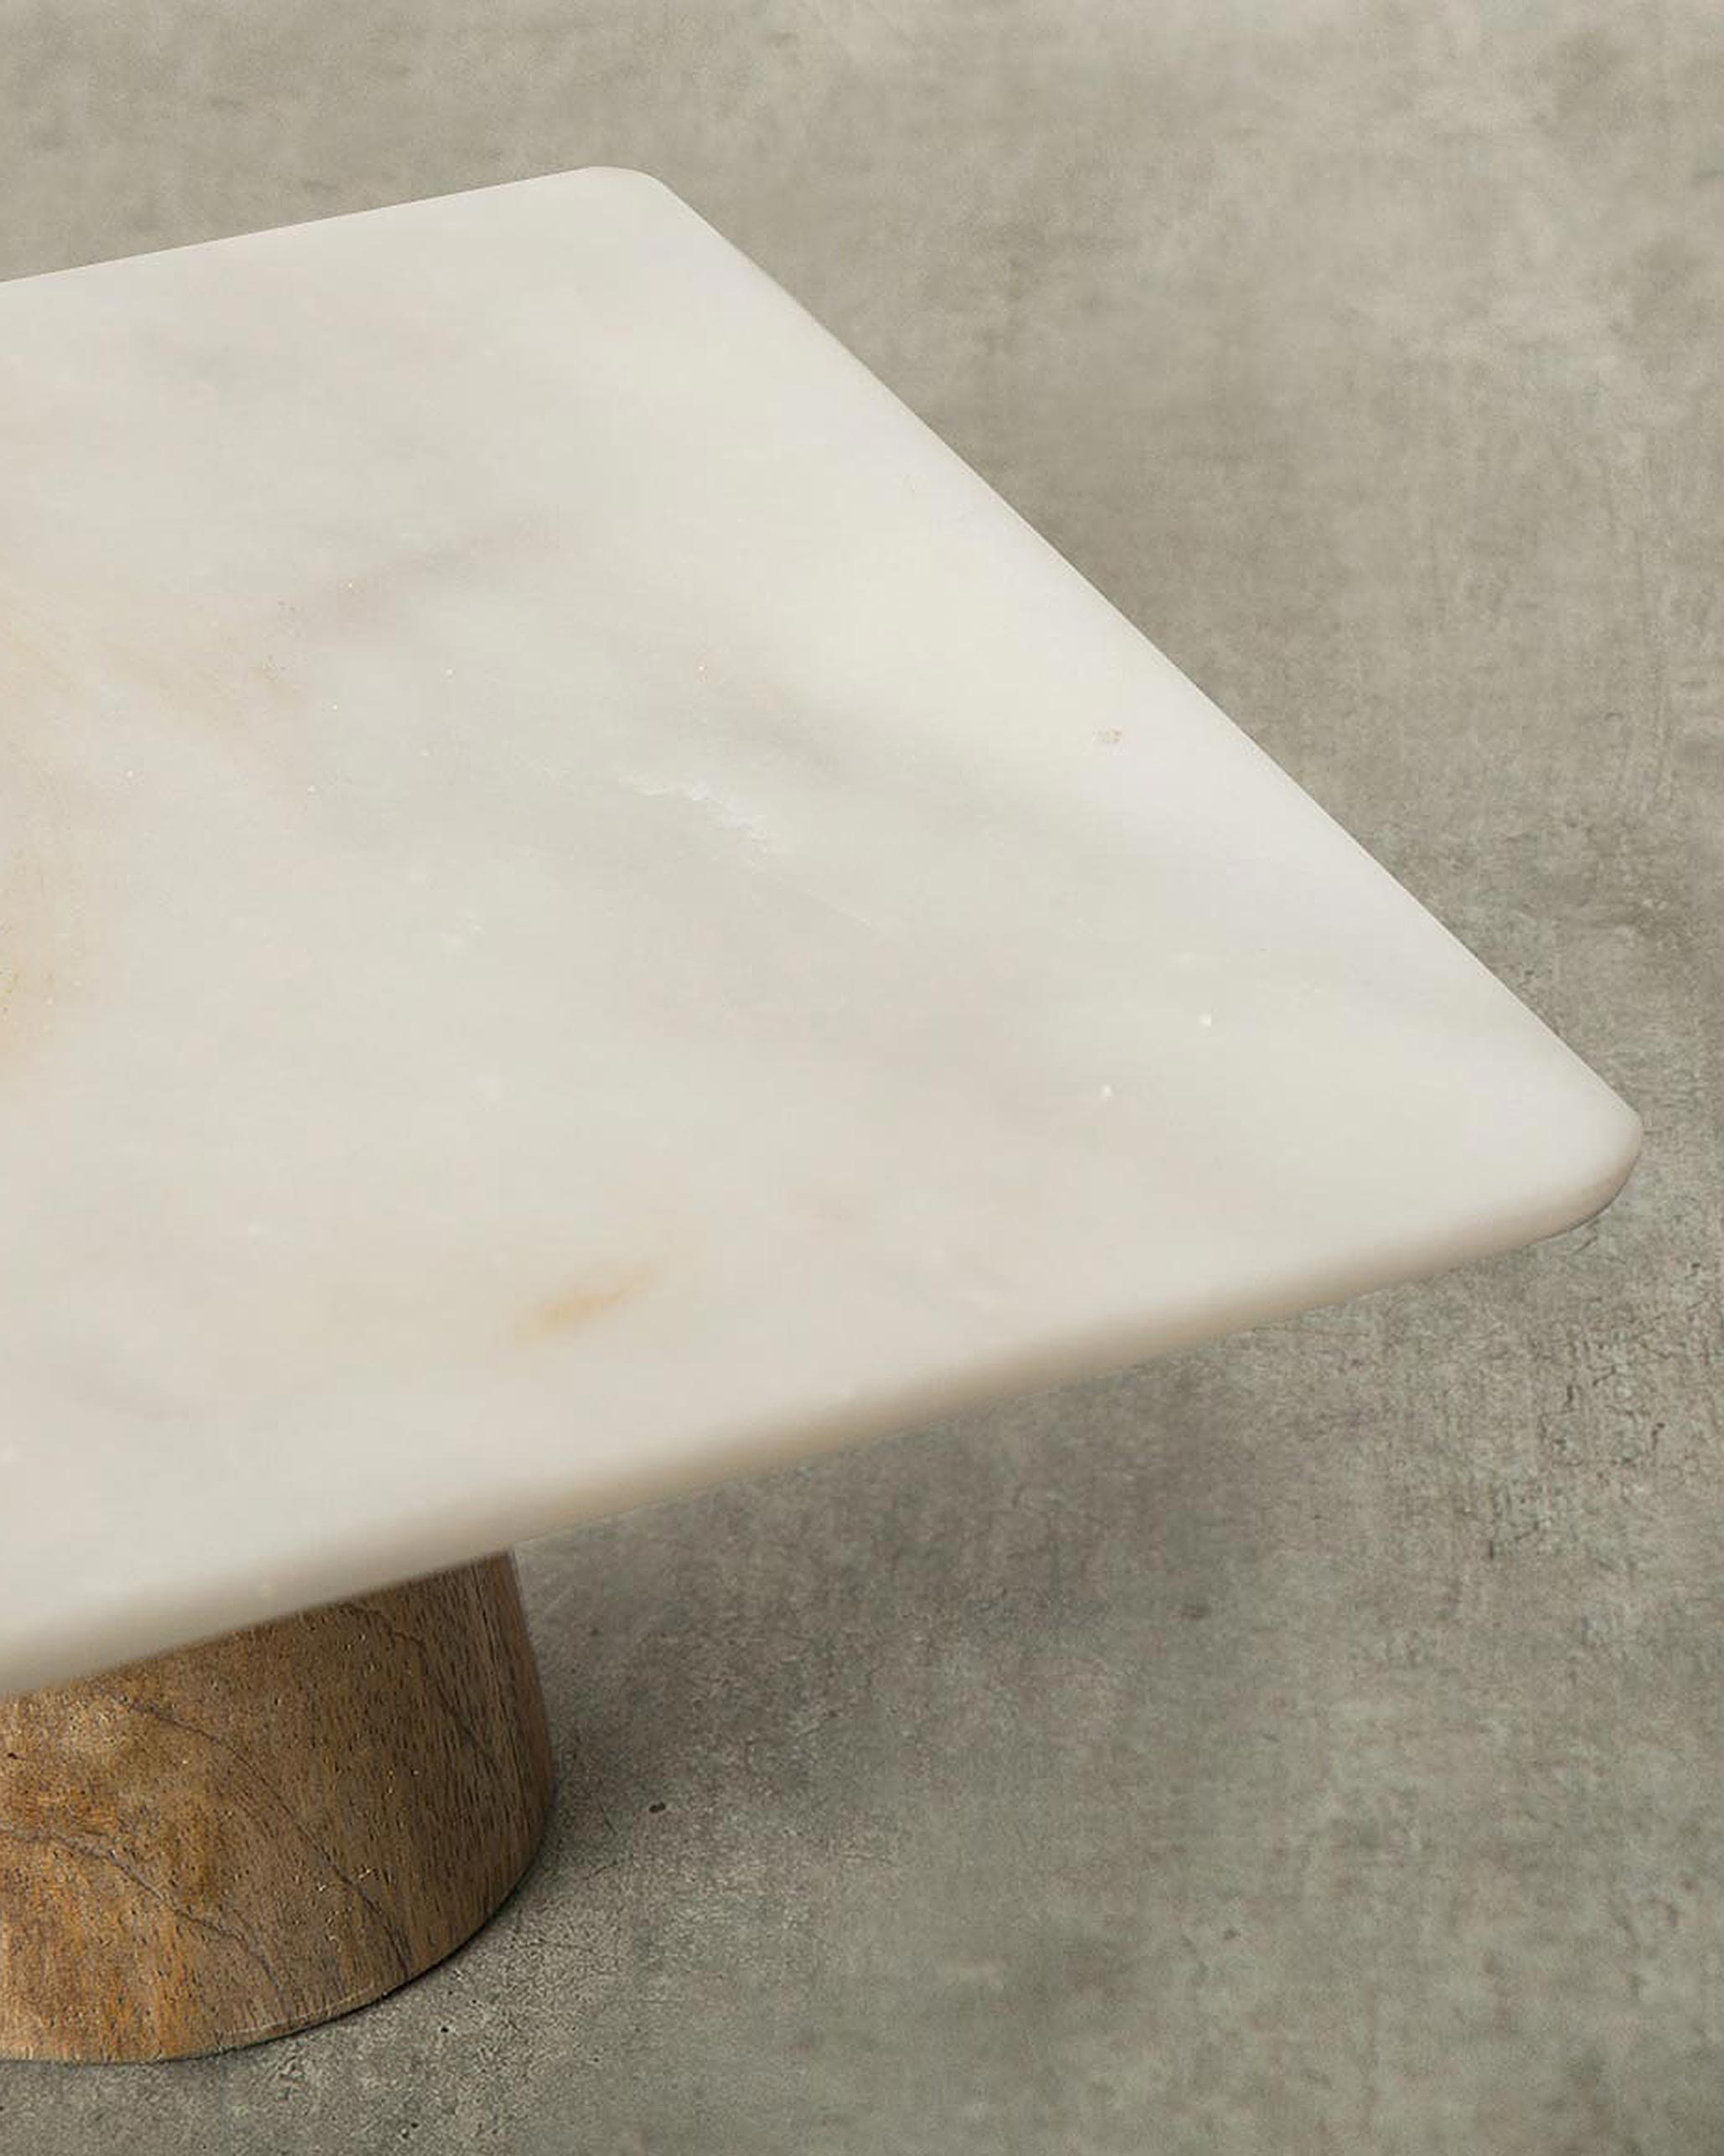 Marble & Wood Cake Stand - Small